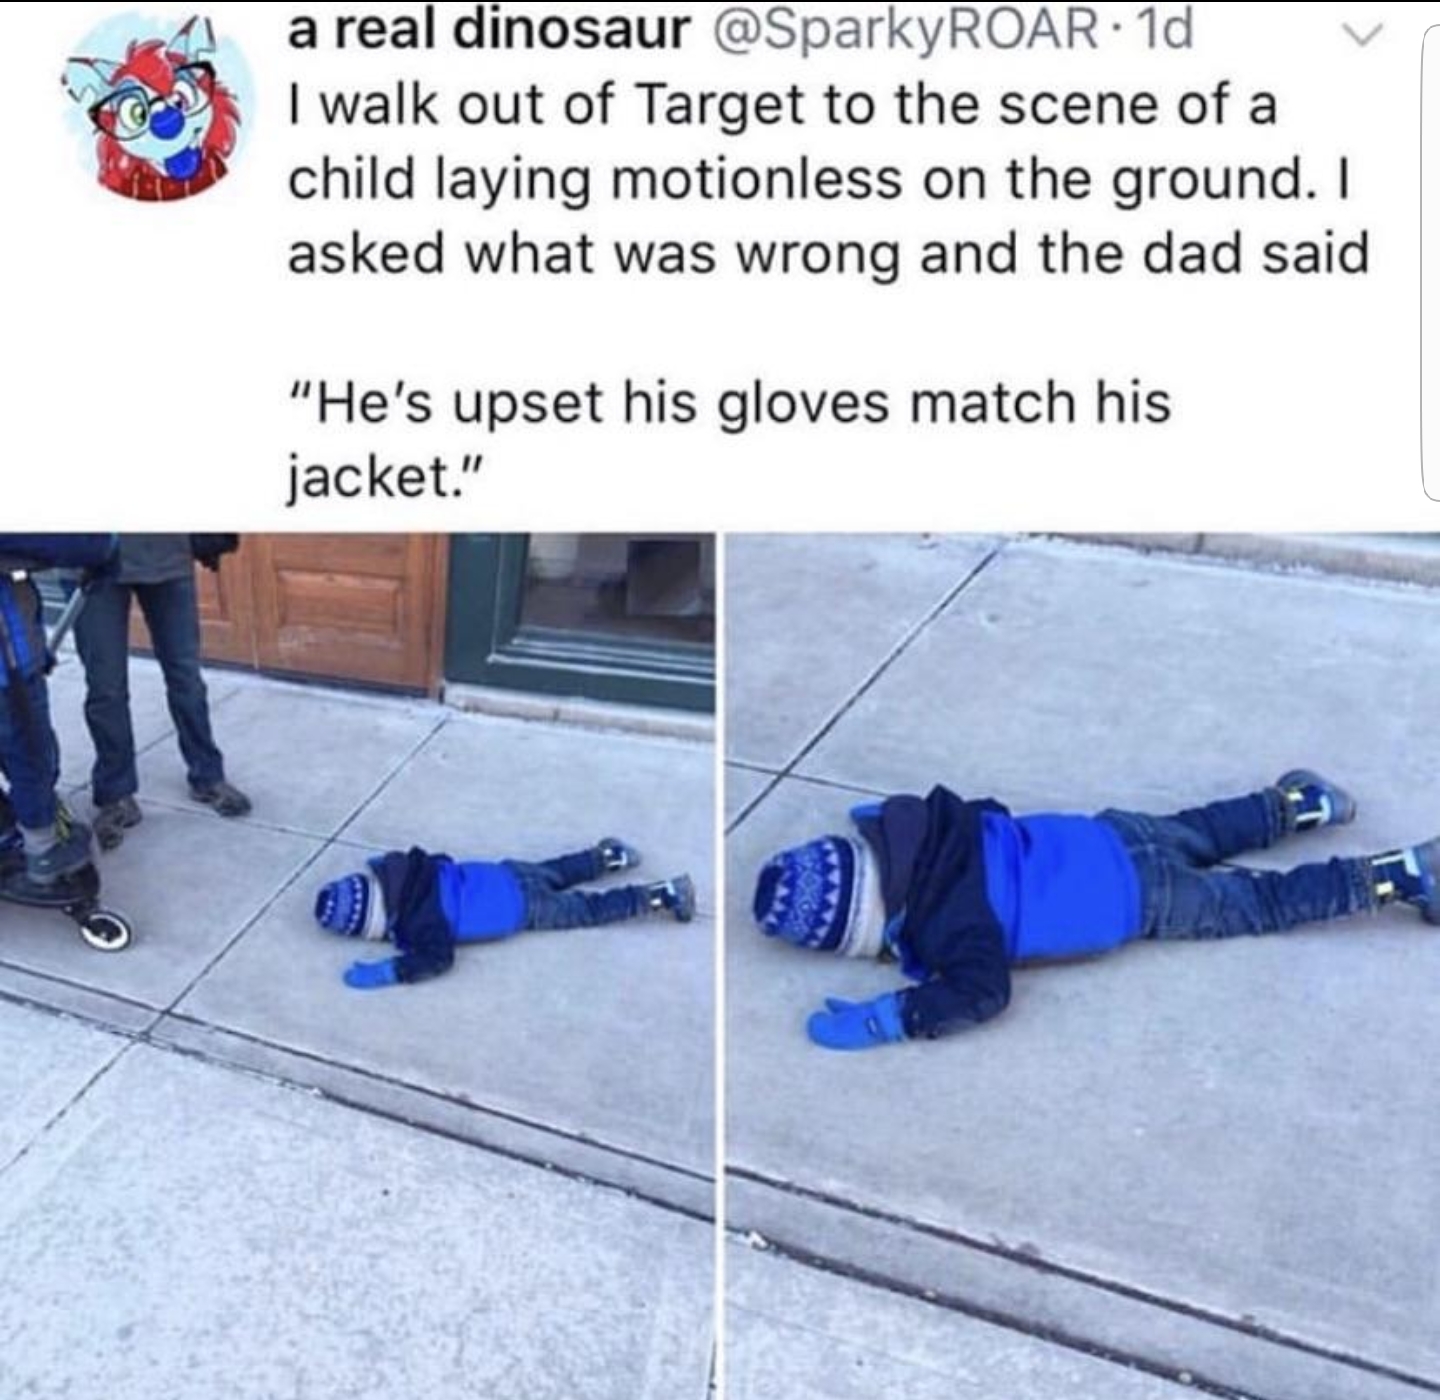 Kids Being Weirdos - funny memes birth control memes - a real dinosaur 1d I walk out of Target to the scene of a child laying motionless on the ground. I asked what was wrong and the dad said "He's upset his gloves match his jacket."